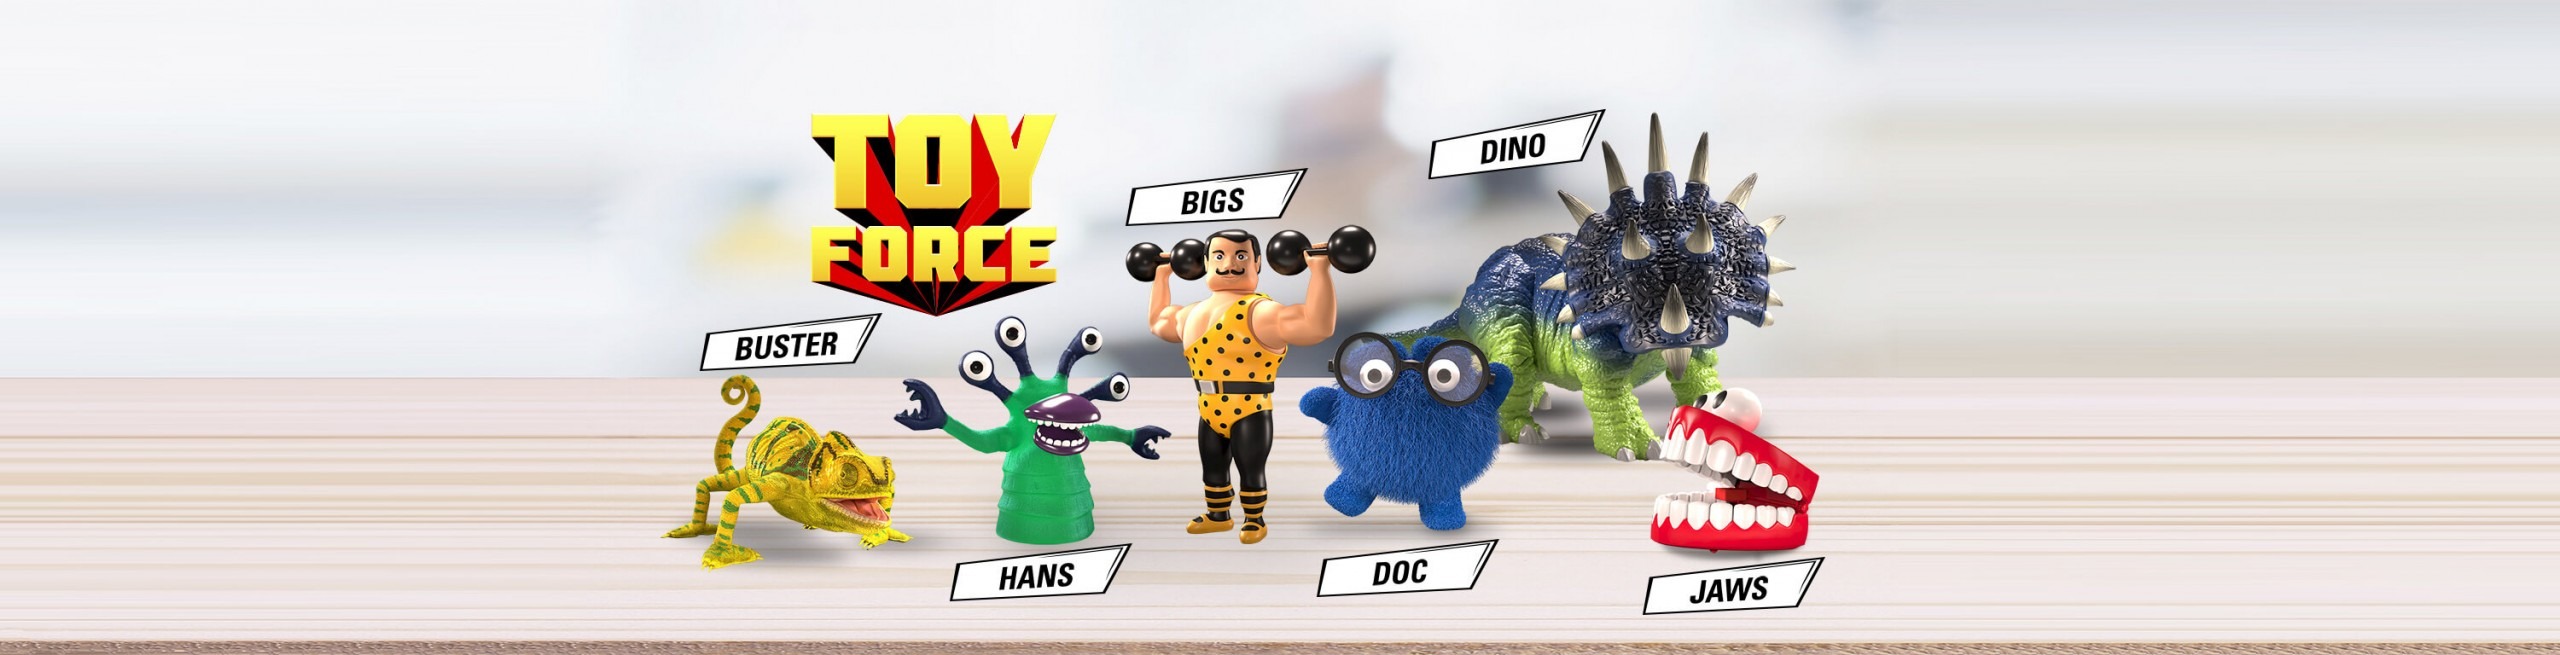 Toy Force family image